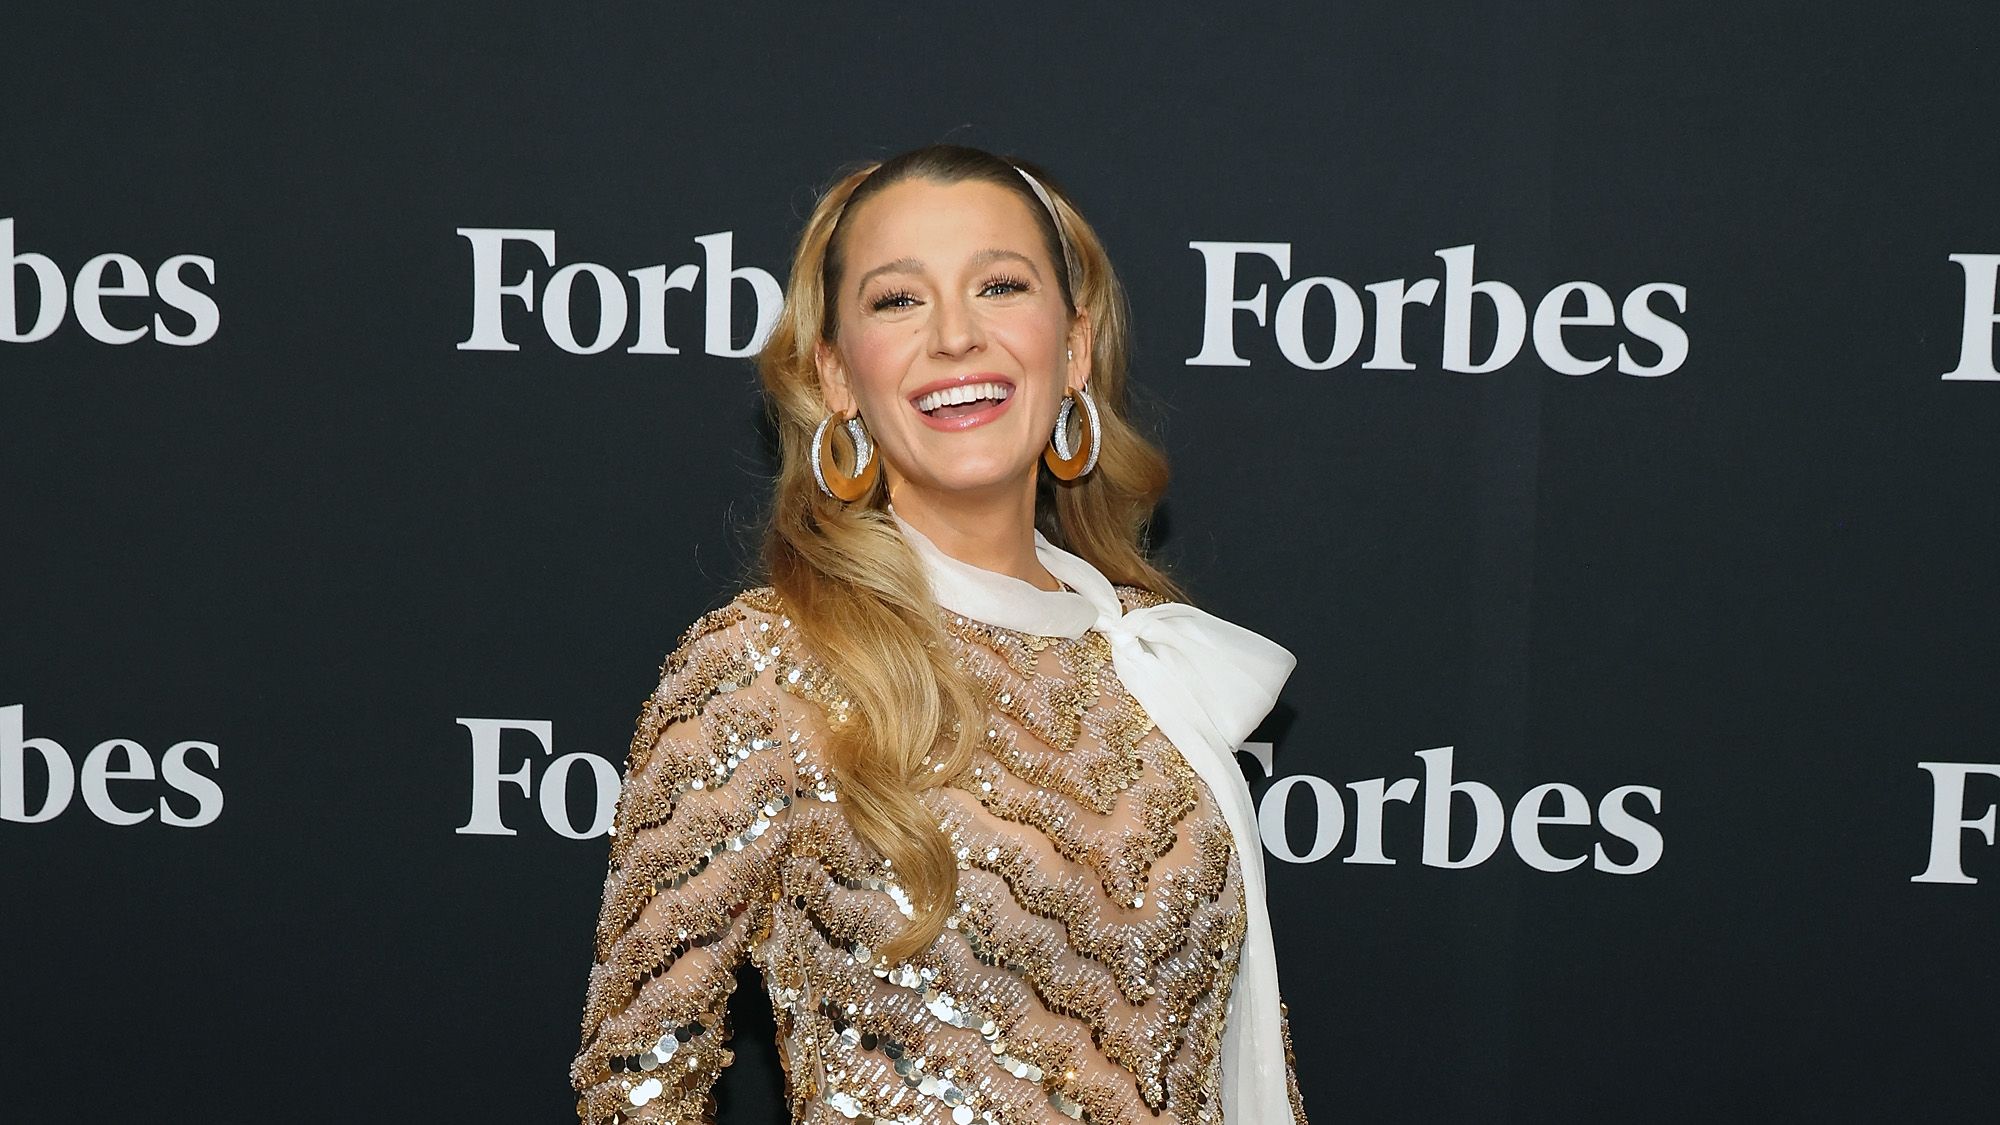 Blake Lively's Trainer Shares Her Exact Workout Routine